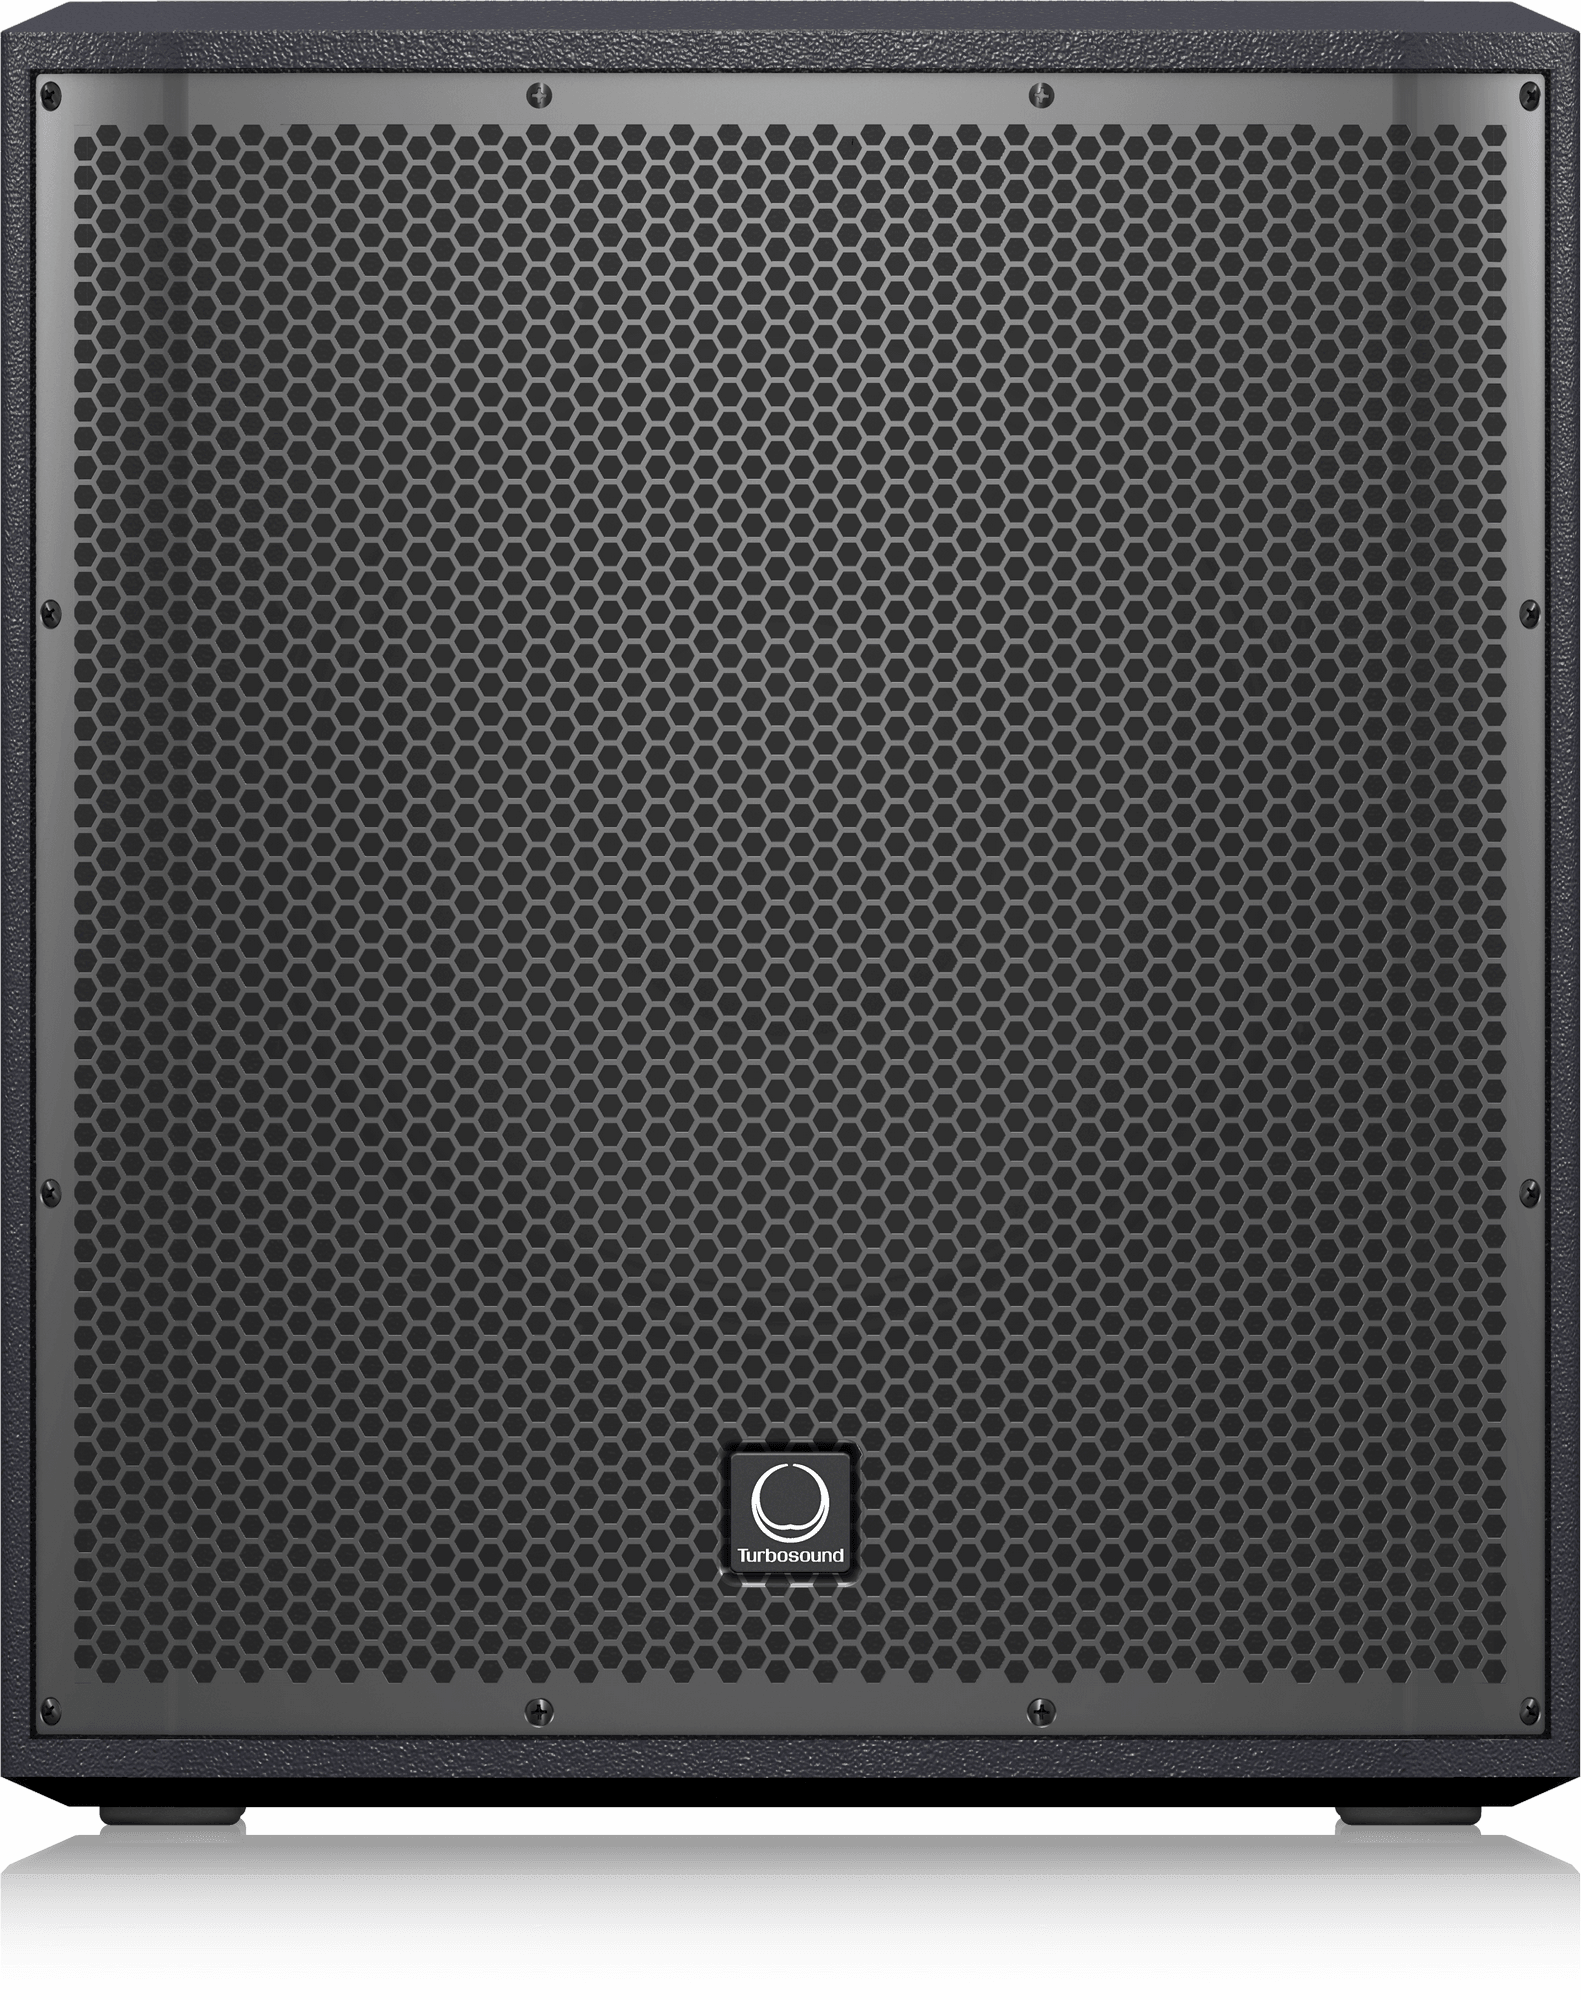 Turbosound iP12B-1000 Watt Powered 12" Subwoofer with Dual Amplifiers for Satellite Speakers